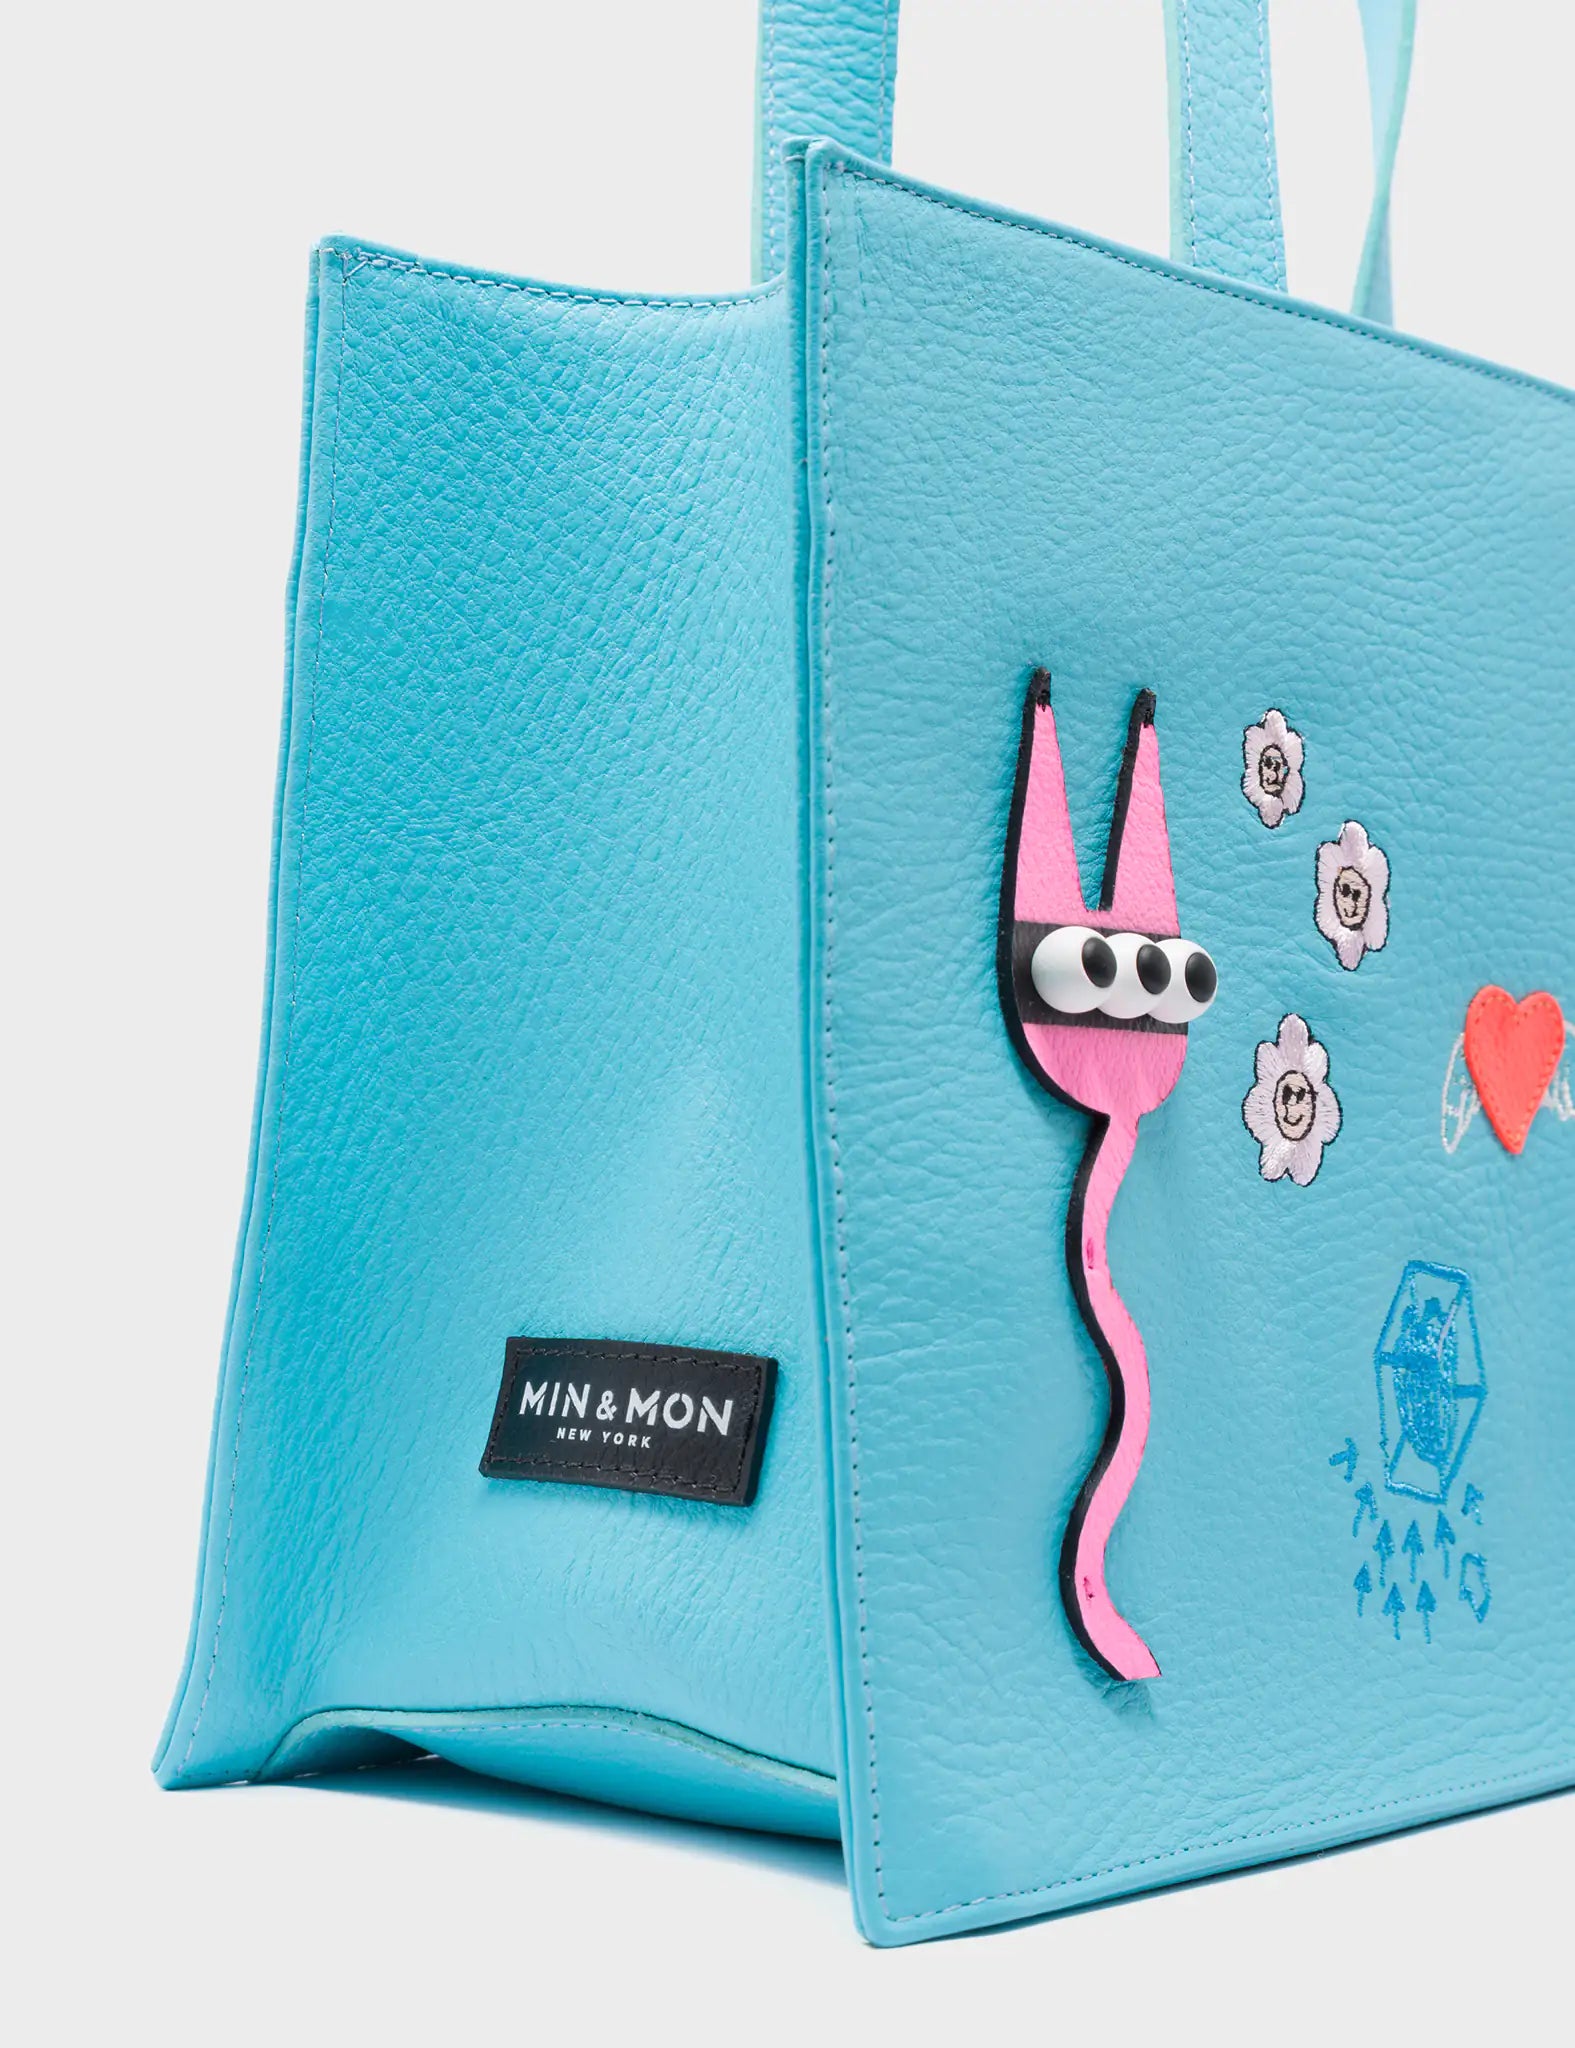 Marko Small Cyan Leather Tote Bag - Urban Doodles Applique - Detail View